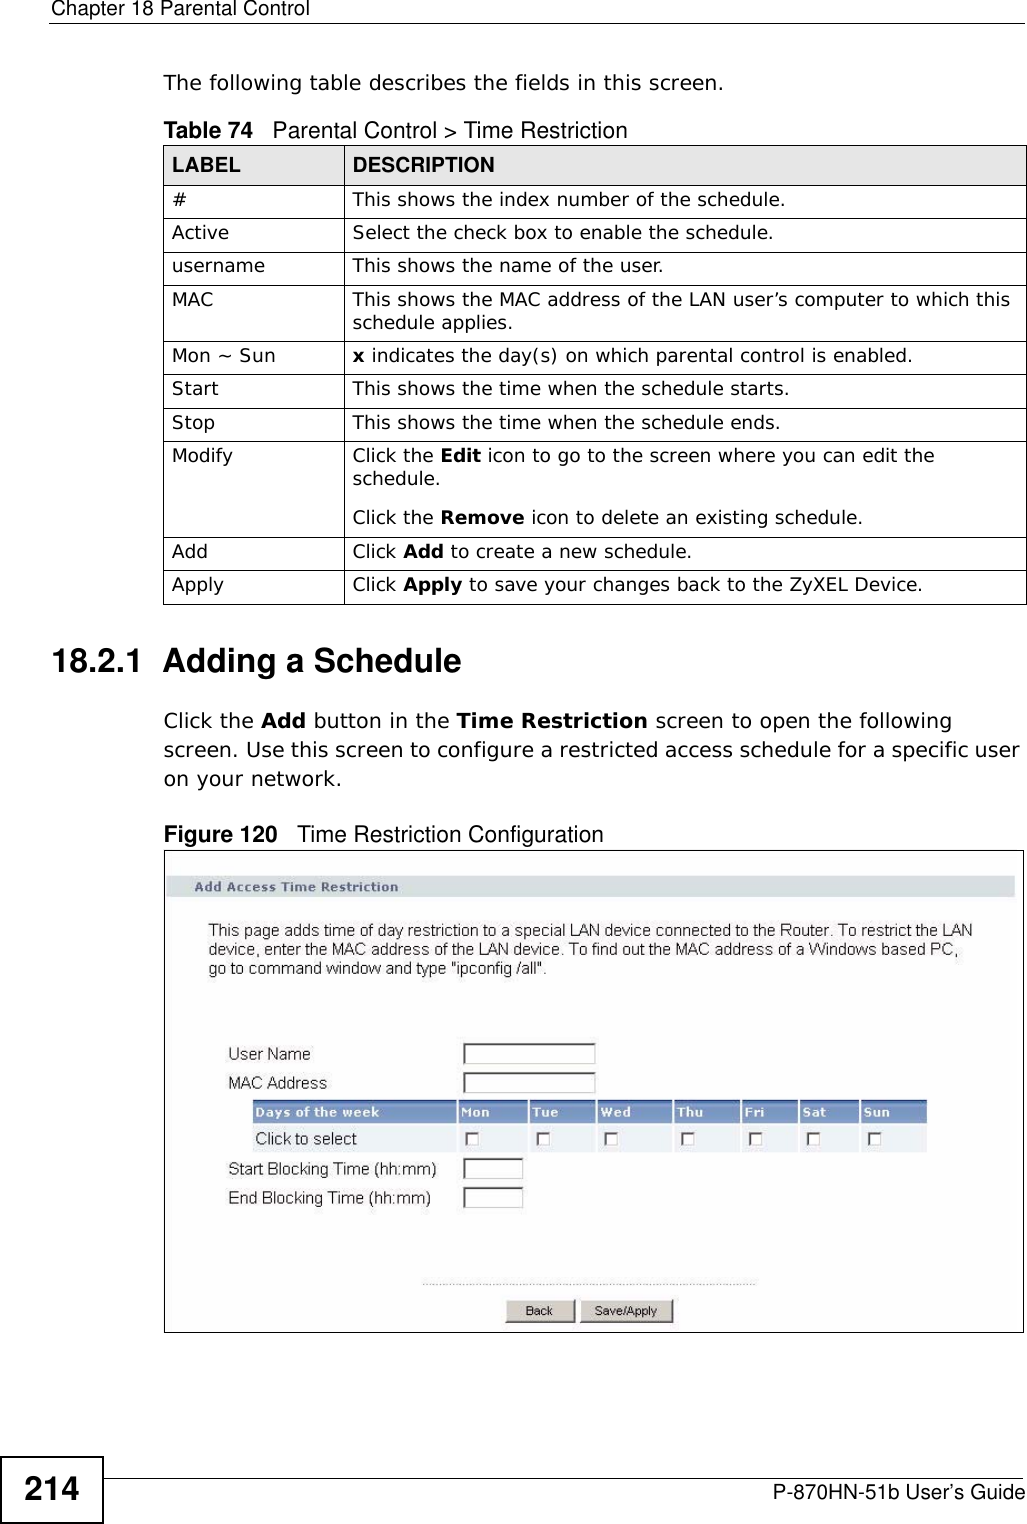 Chapter 18 Parental ControlP-870HN-51b User’s Guide214The following table describes the fields in this screen. 18.2.1  Adding a ScheduleClick the Add button in the Time Restriction screen to open the following screen. Use this screen to configure a restricted access schedule for a specific user on your network. Figure 120   Time Restriction Configuration Table 74   Parental Control &gt; Time RestrictionLABEL DESCRIPTION#This shows the index number of the schedule.Active Select the check box to enable the schedule.username This shows the name of the user.MAC This shows the MAC address of the LAN user’s computer to which this schedule applies.Mon ~ Sun x indicates the day(s) on which parental control is enabled.Start This shows the time when the schedule starts.Stop This shows the time when the schedule ends.Modify Click the Edit icon to go to the screen where you can edit the schedule.Click the Remove icon to delete an existing schedule.Add Click Add to create a new schedule.Apply Click Apply to save your changes back to the ZyXEL Device.